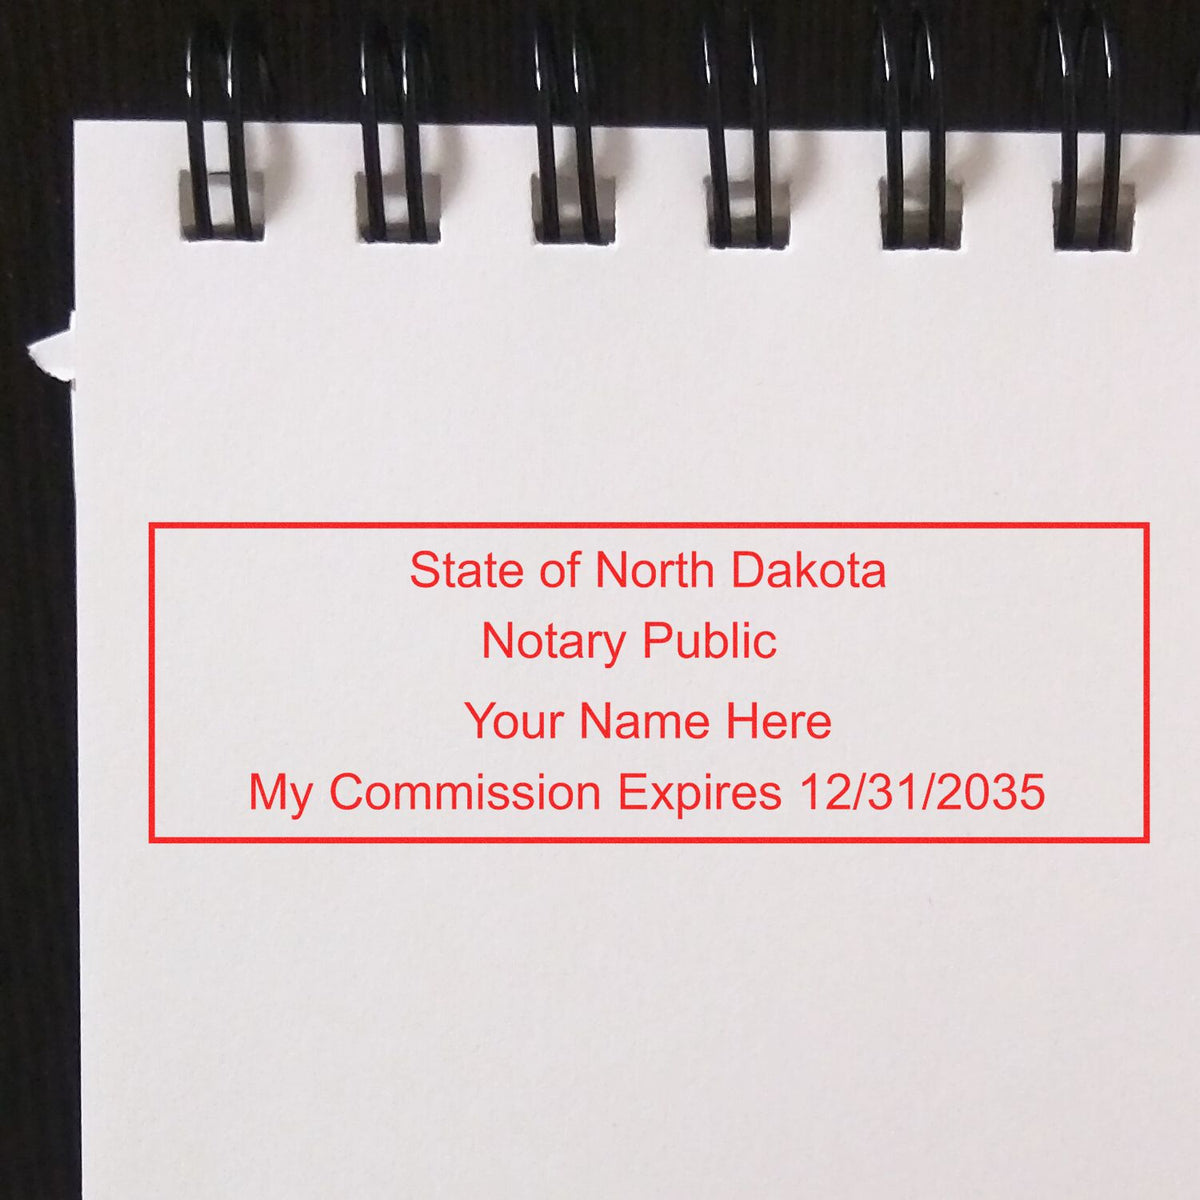 An alternative view of the Slim Pre-Inked Rectangular Notary Stamp for North Dakota stamped on a sheet of paper showing the image in use